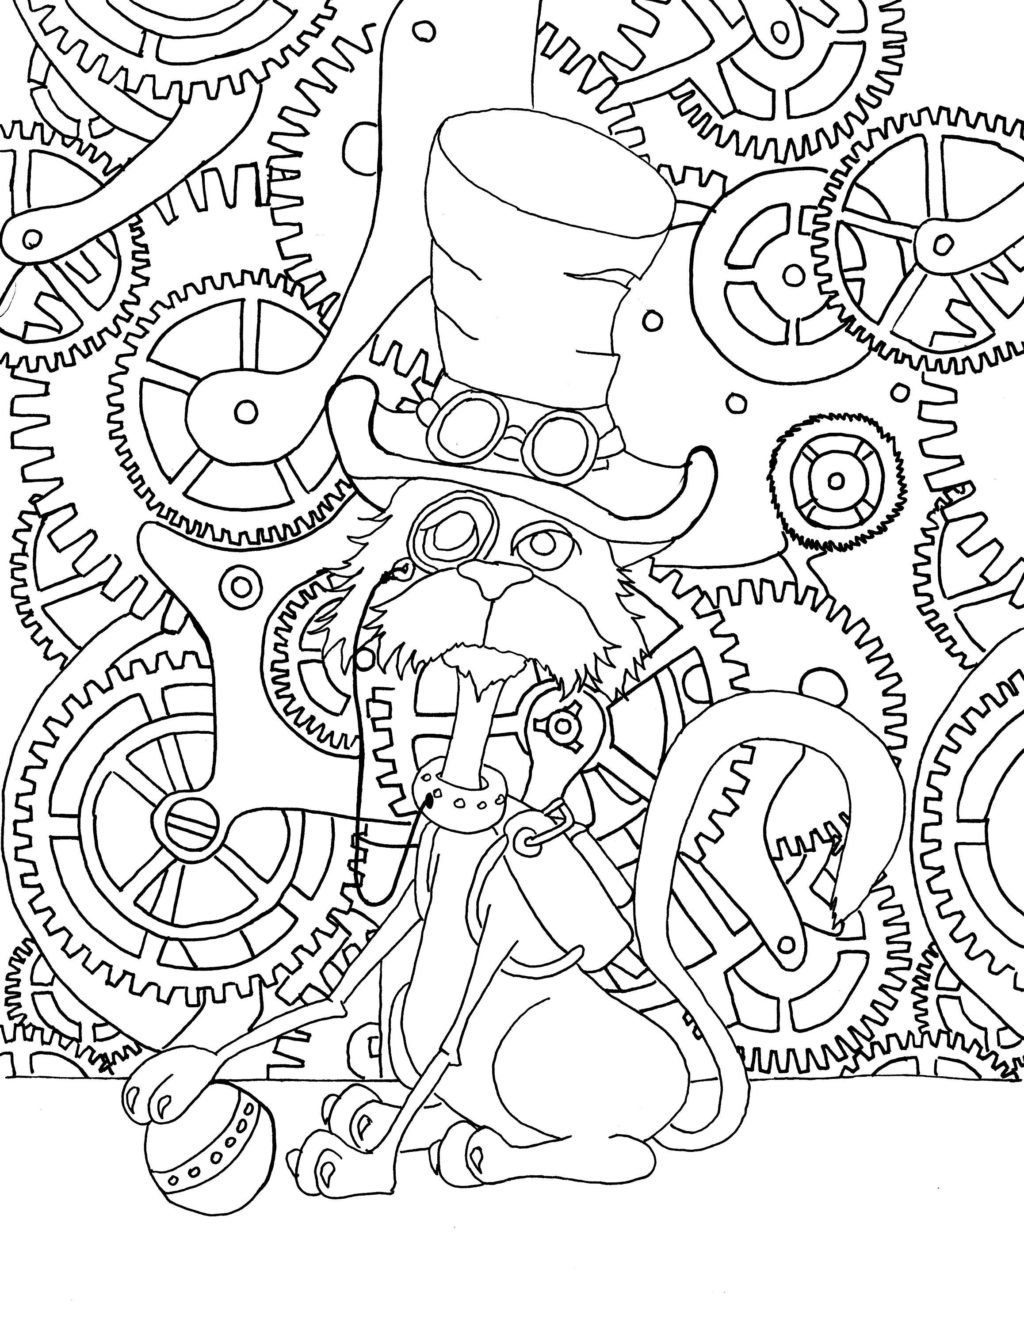 Coloring Pages : Coloring Books For Adults Online Phenomenal ...